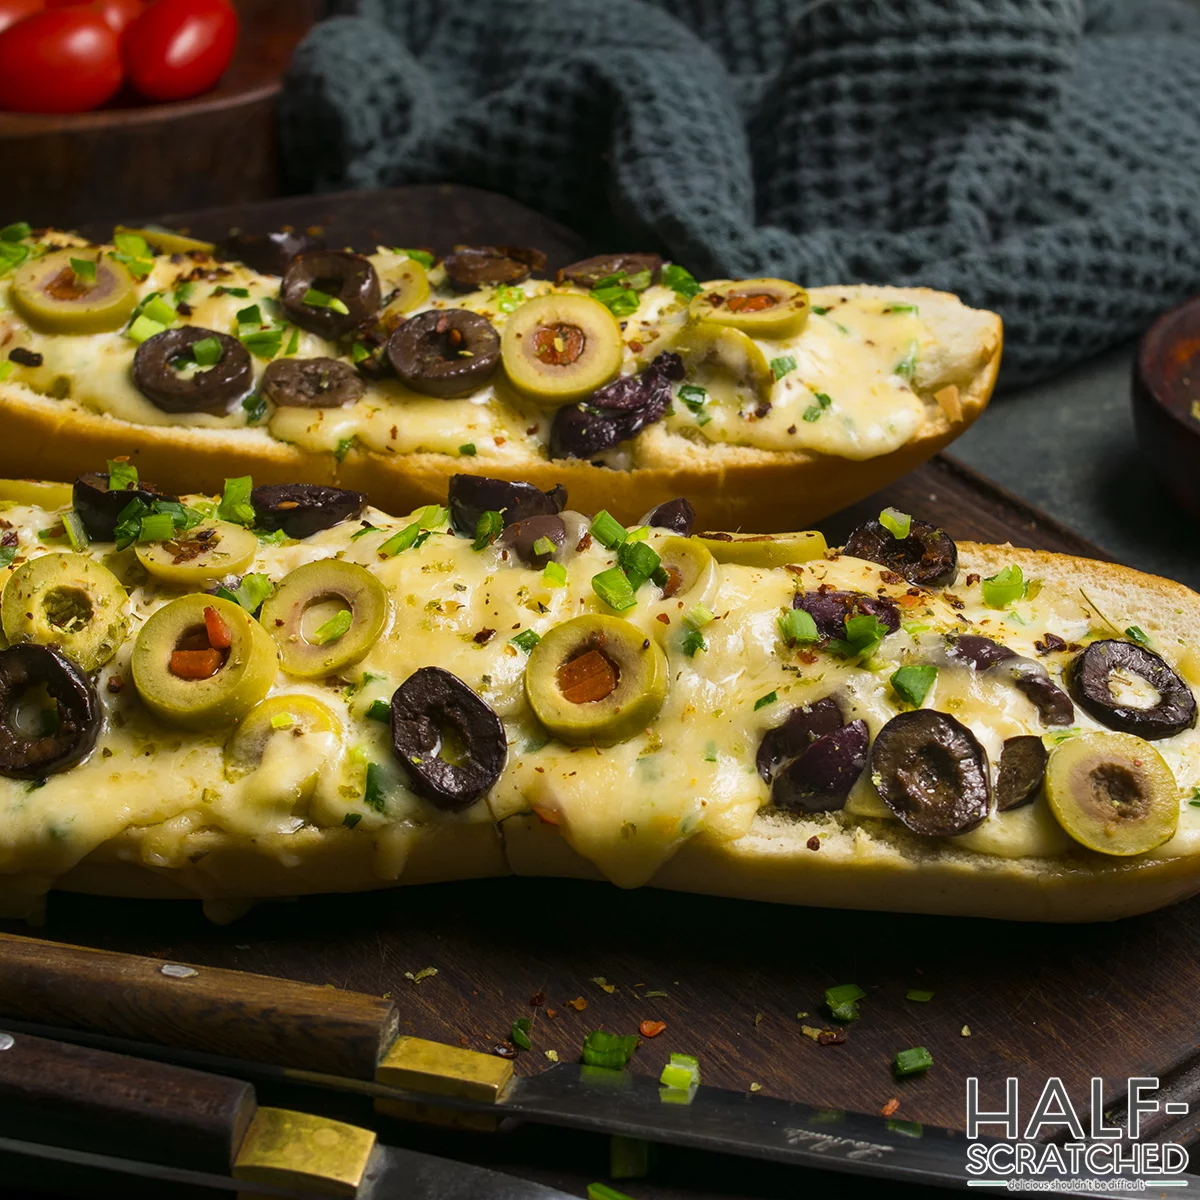 Baked olive bread with melted cheese and olives